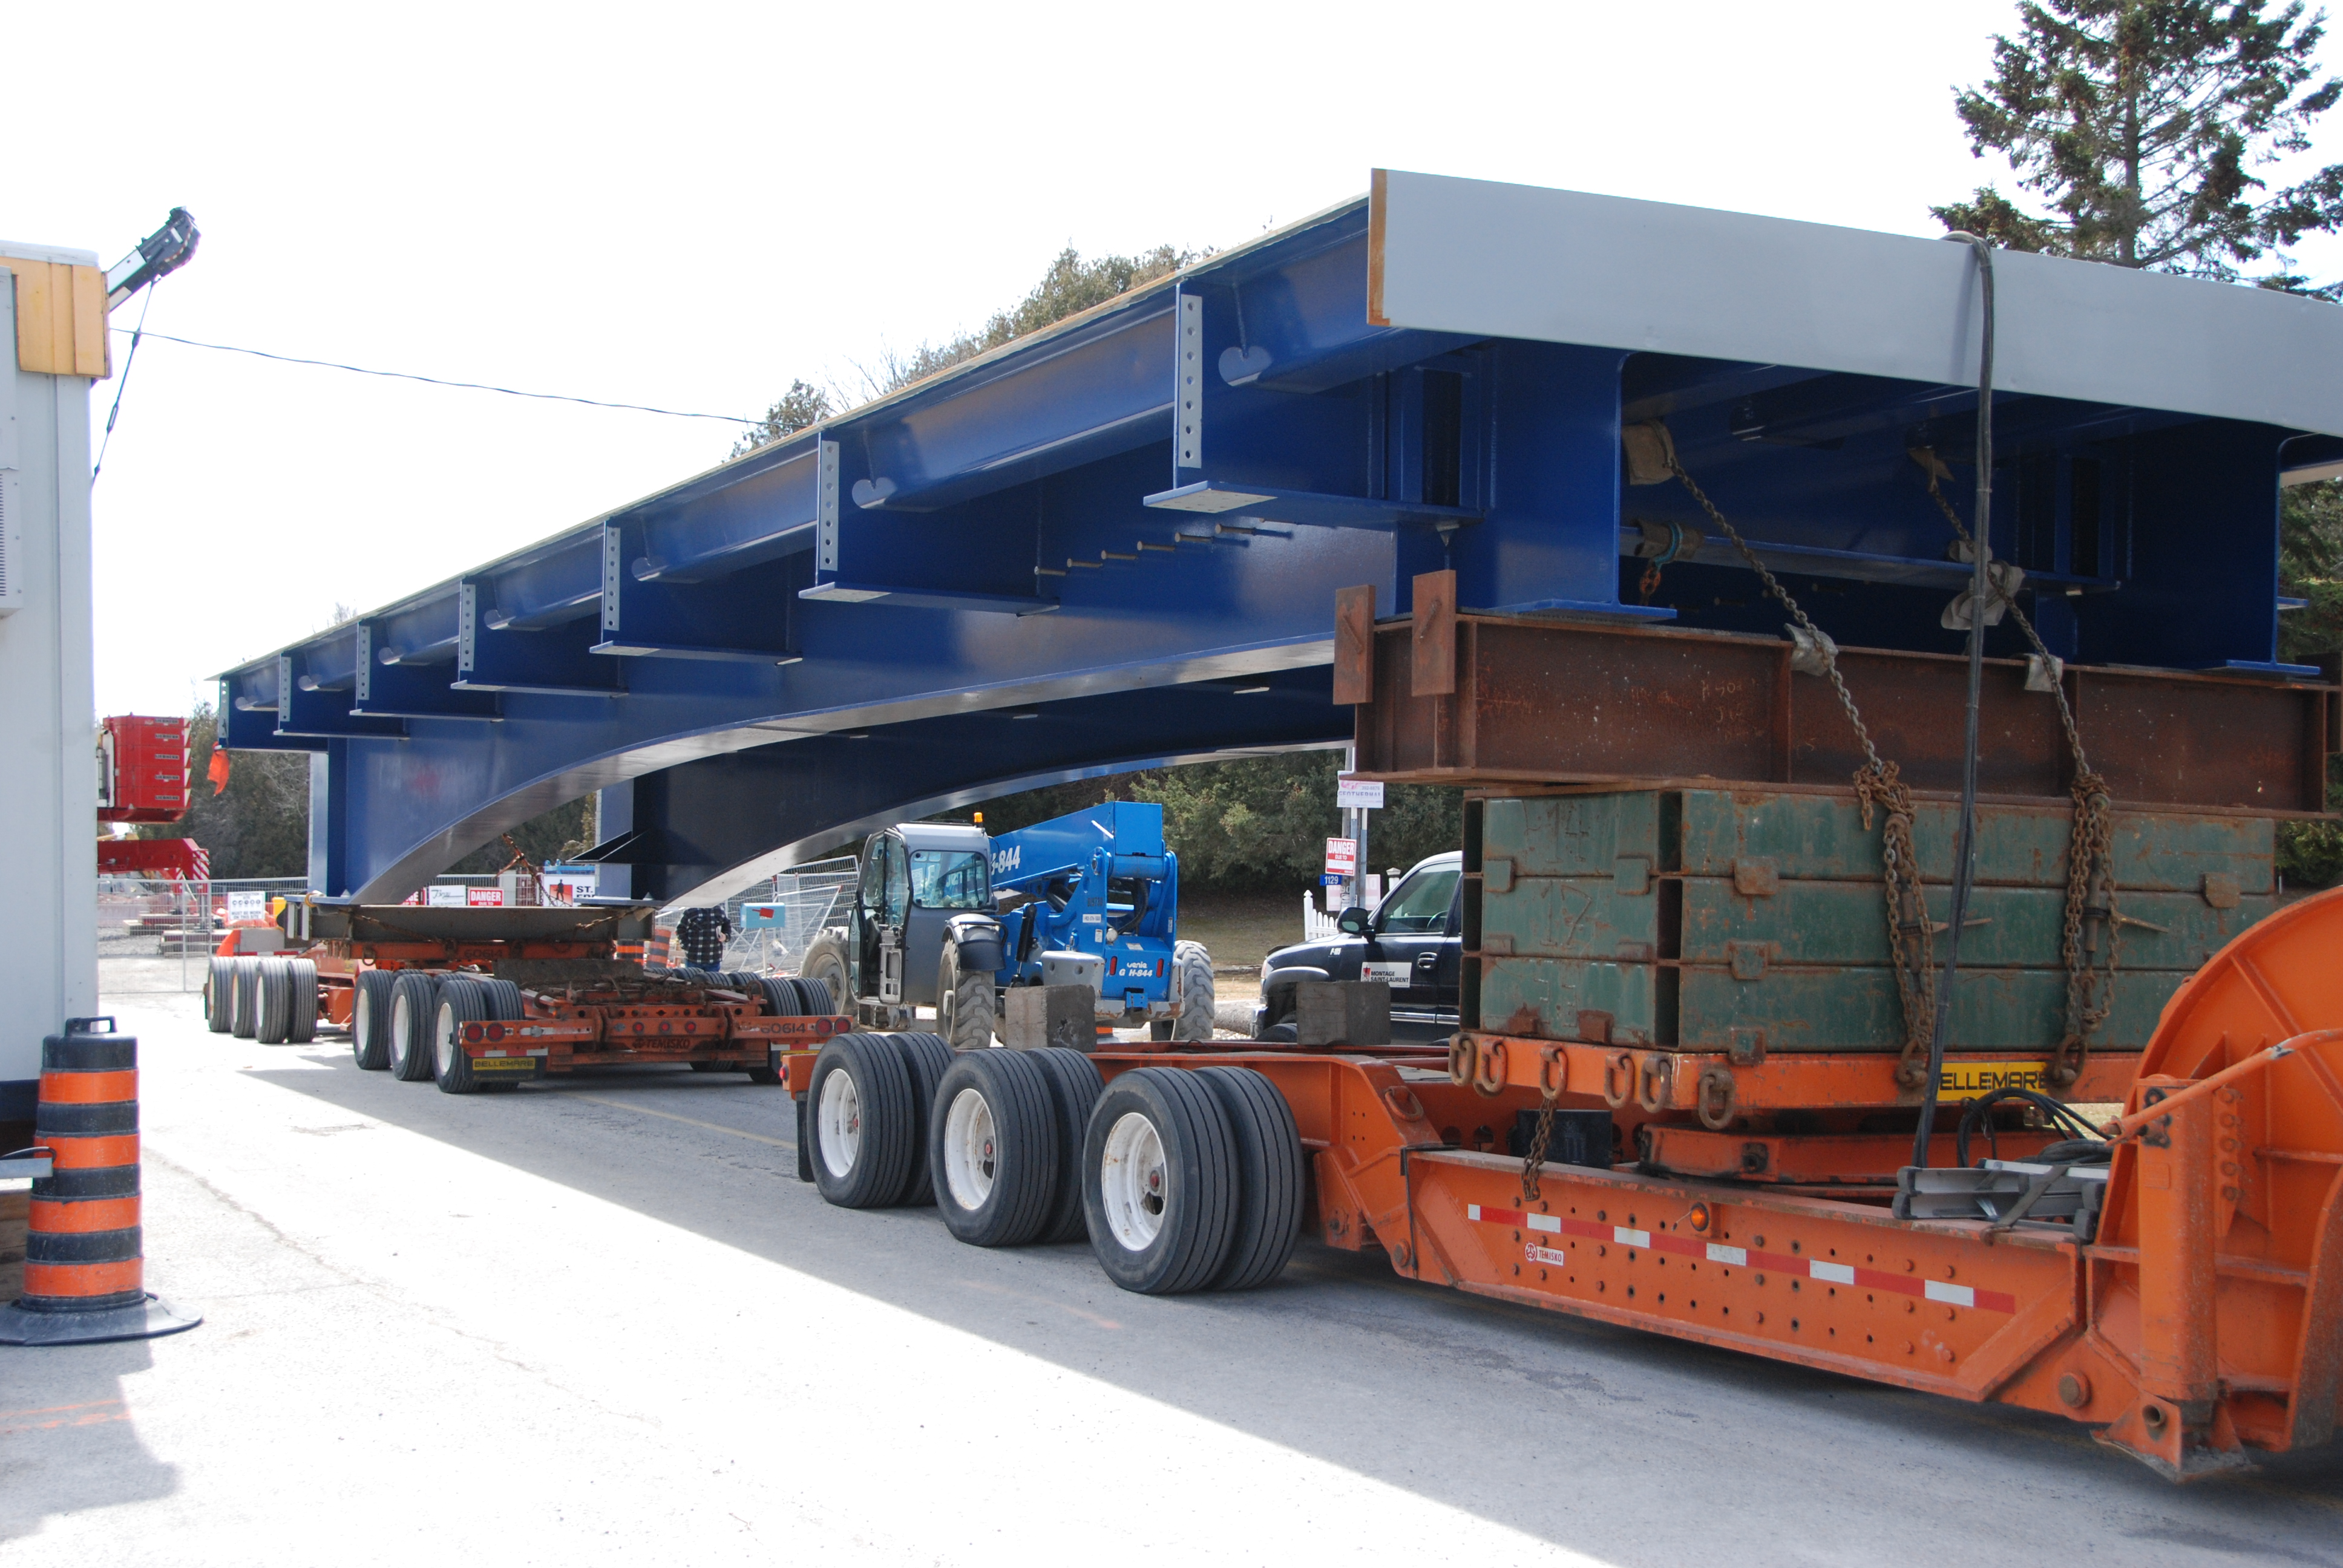 A large blue bridge piece on the flatbed of a truck.